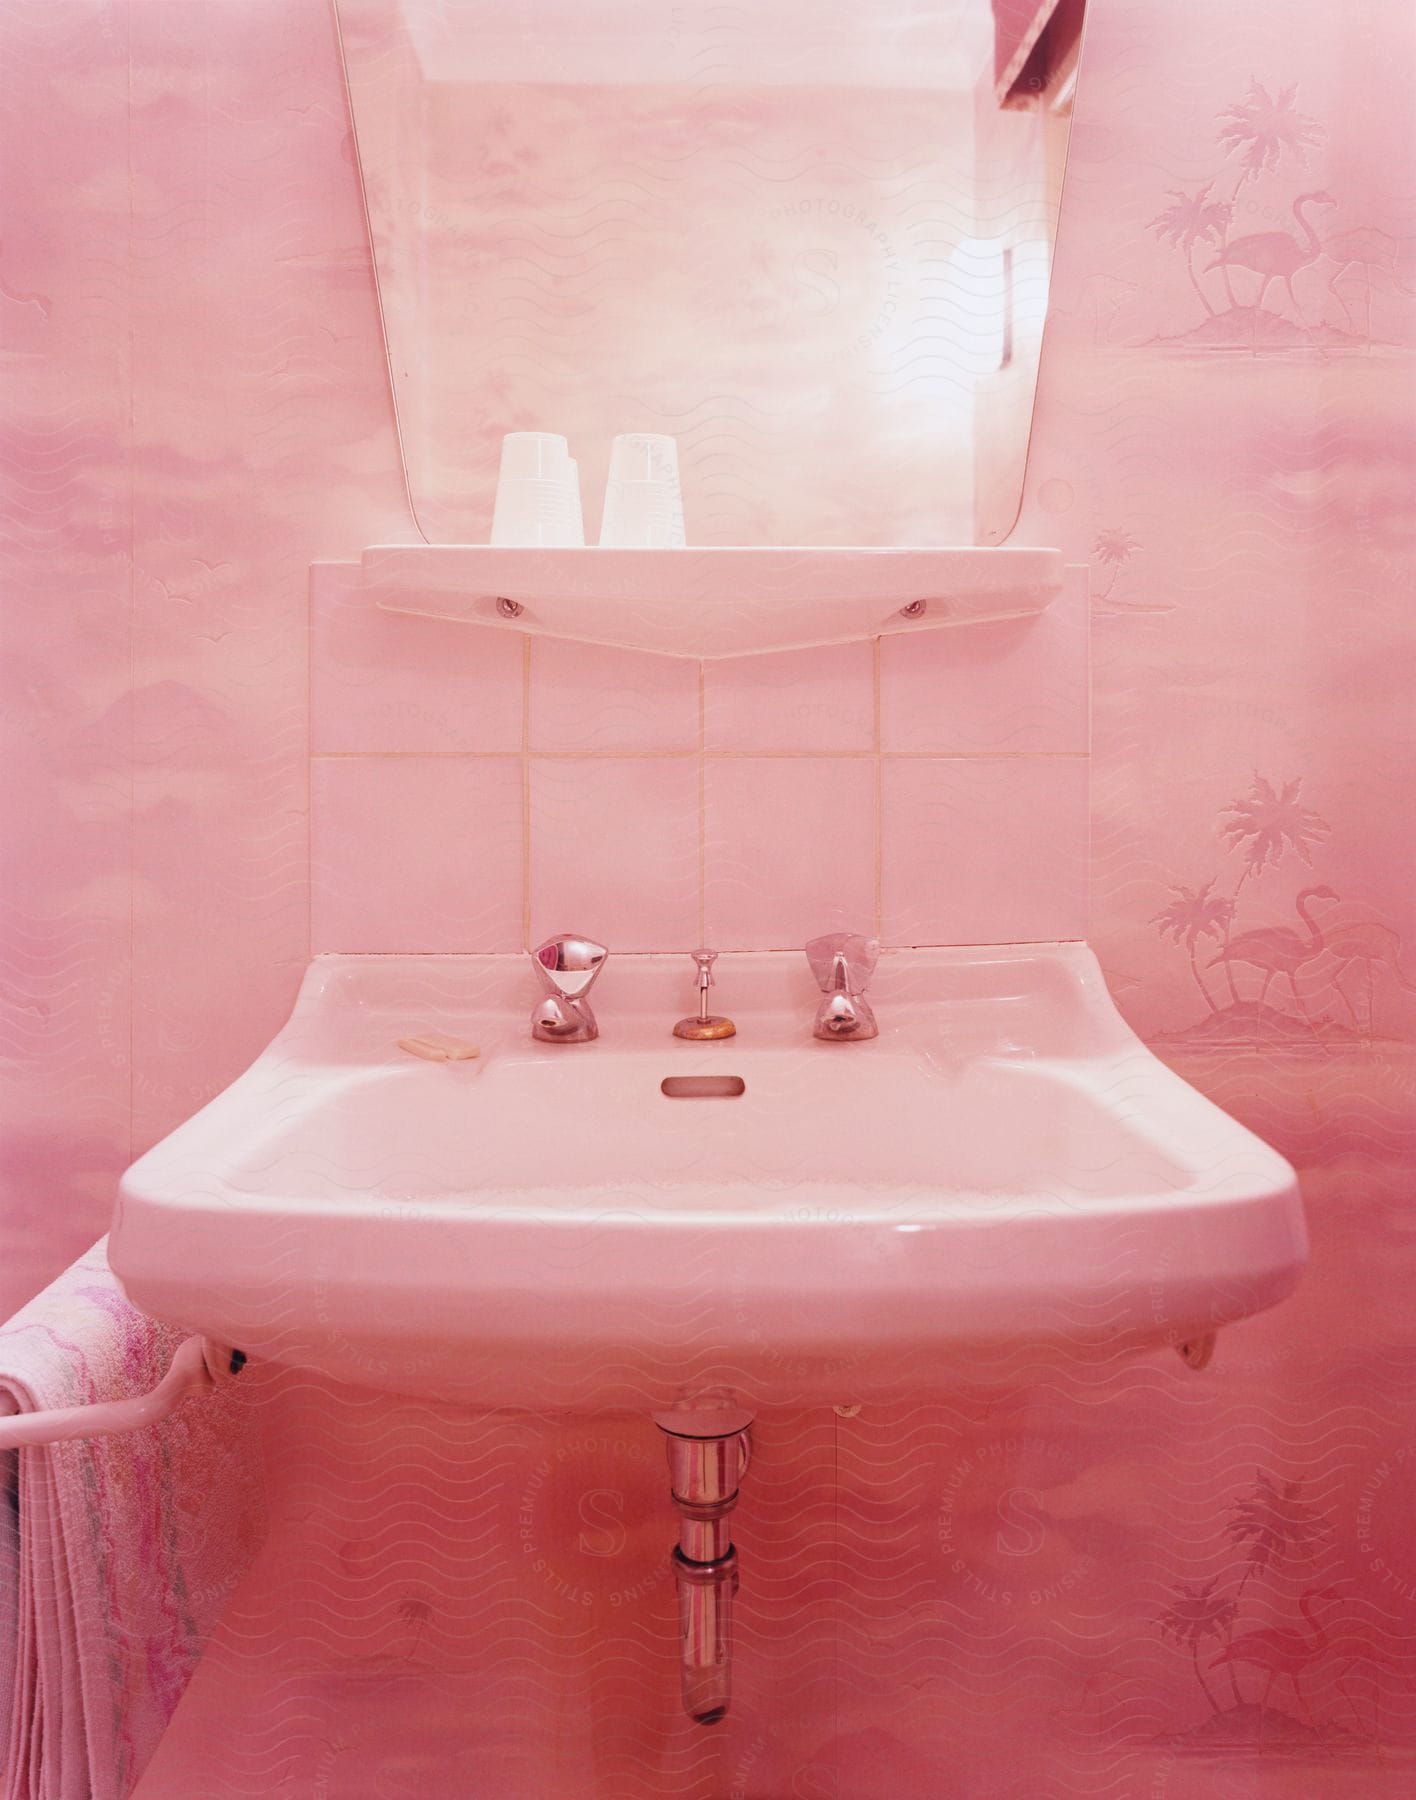 Pink bathroom interior with wallpaper featuring a sink mirror towel and tap